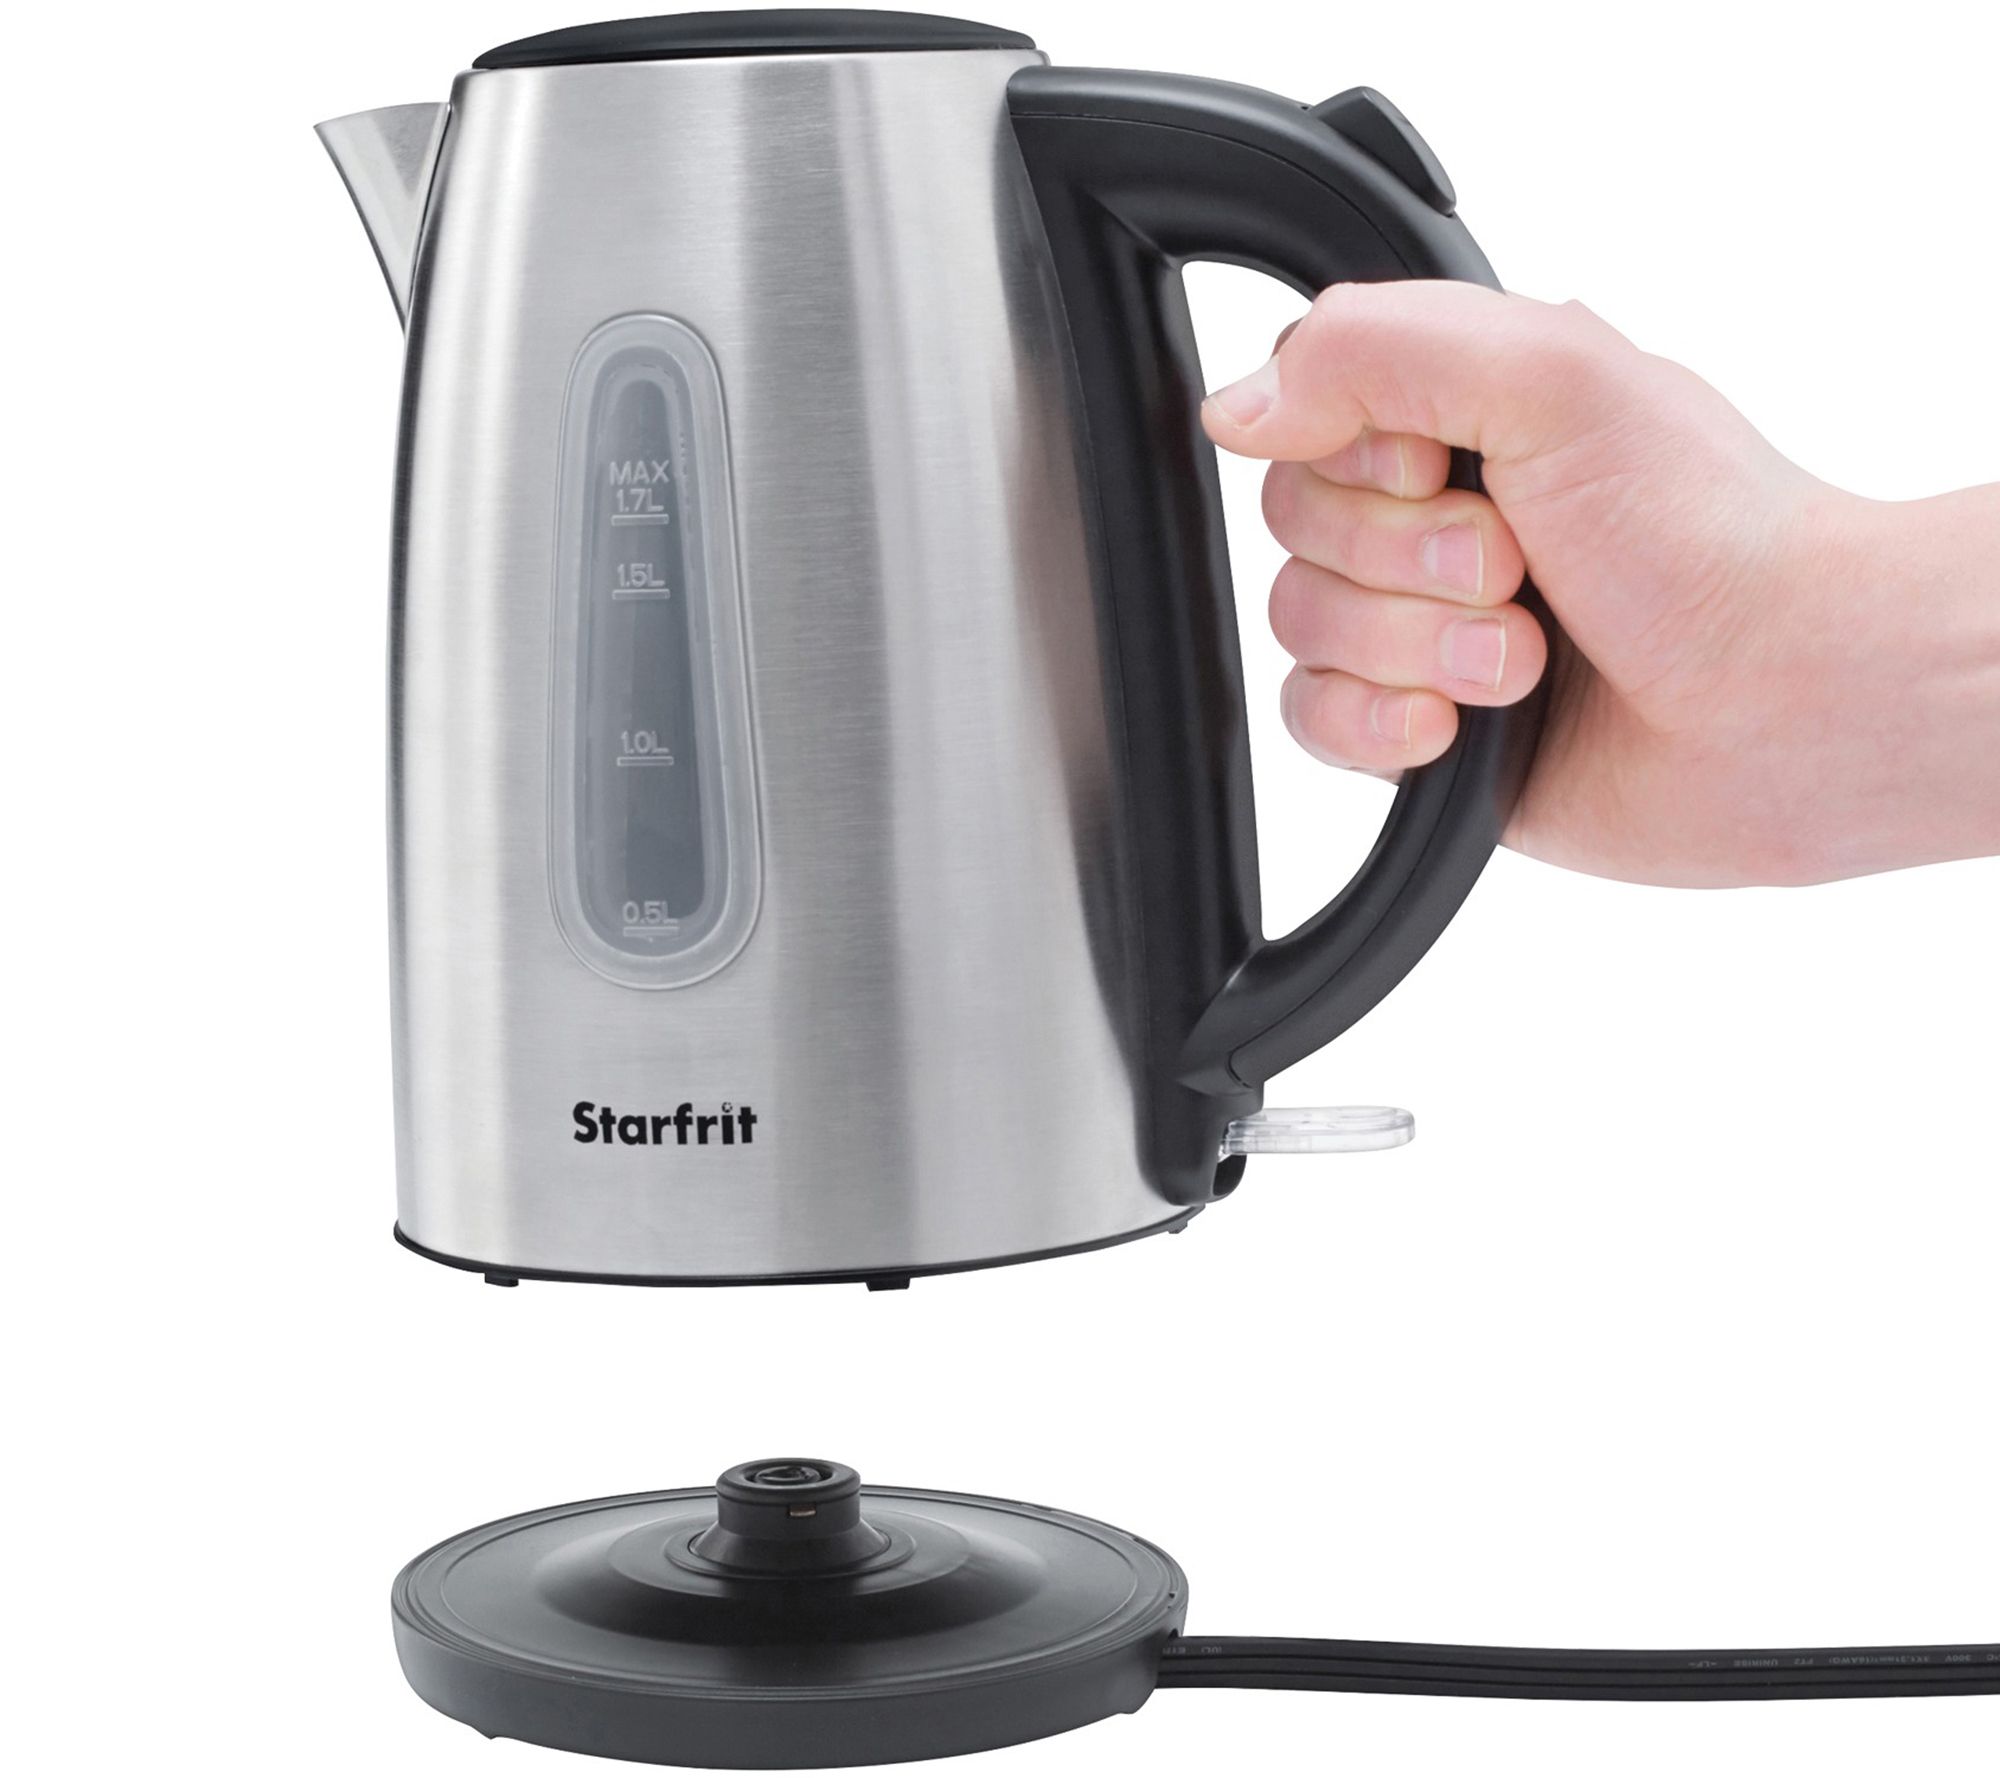 KENMORE 1.7L Cordless 6-Cup Electric Kettle in Silver with 6